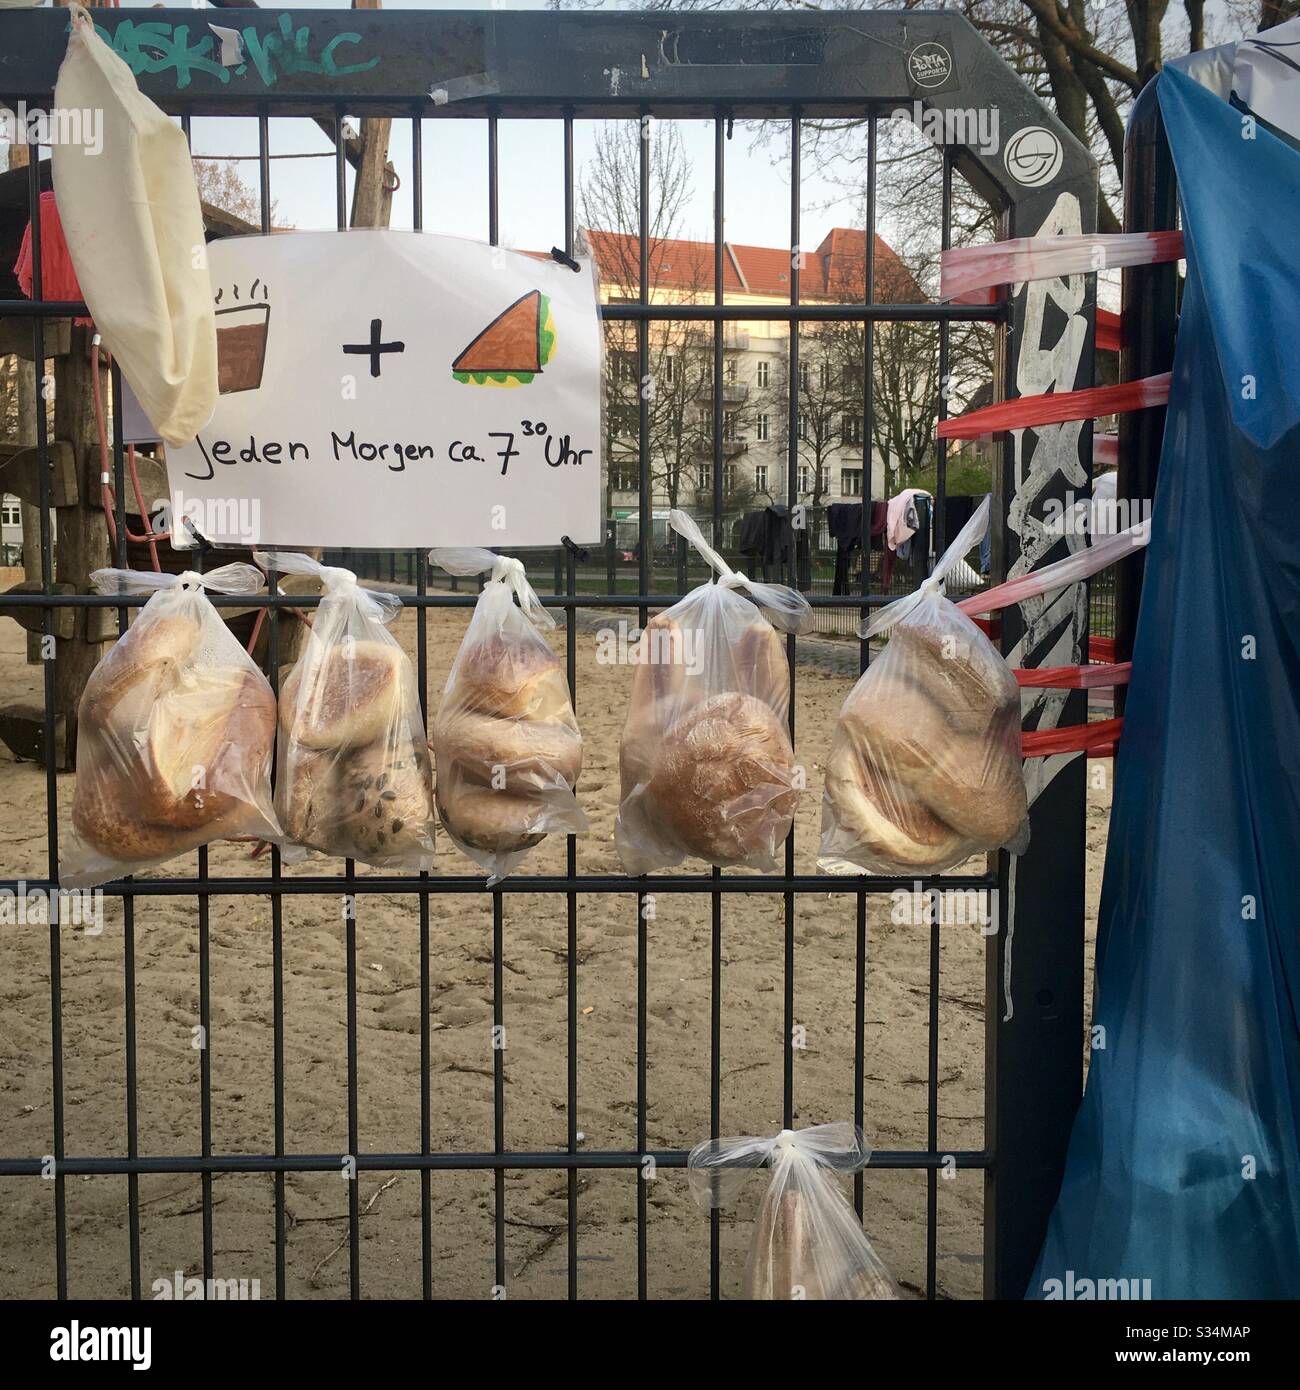 Local aid to the homeless and the poor during the corona crisis in Berlin Friedrichshain. Stock Photo